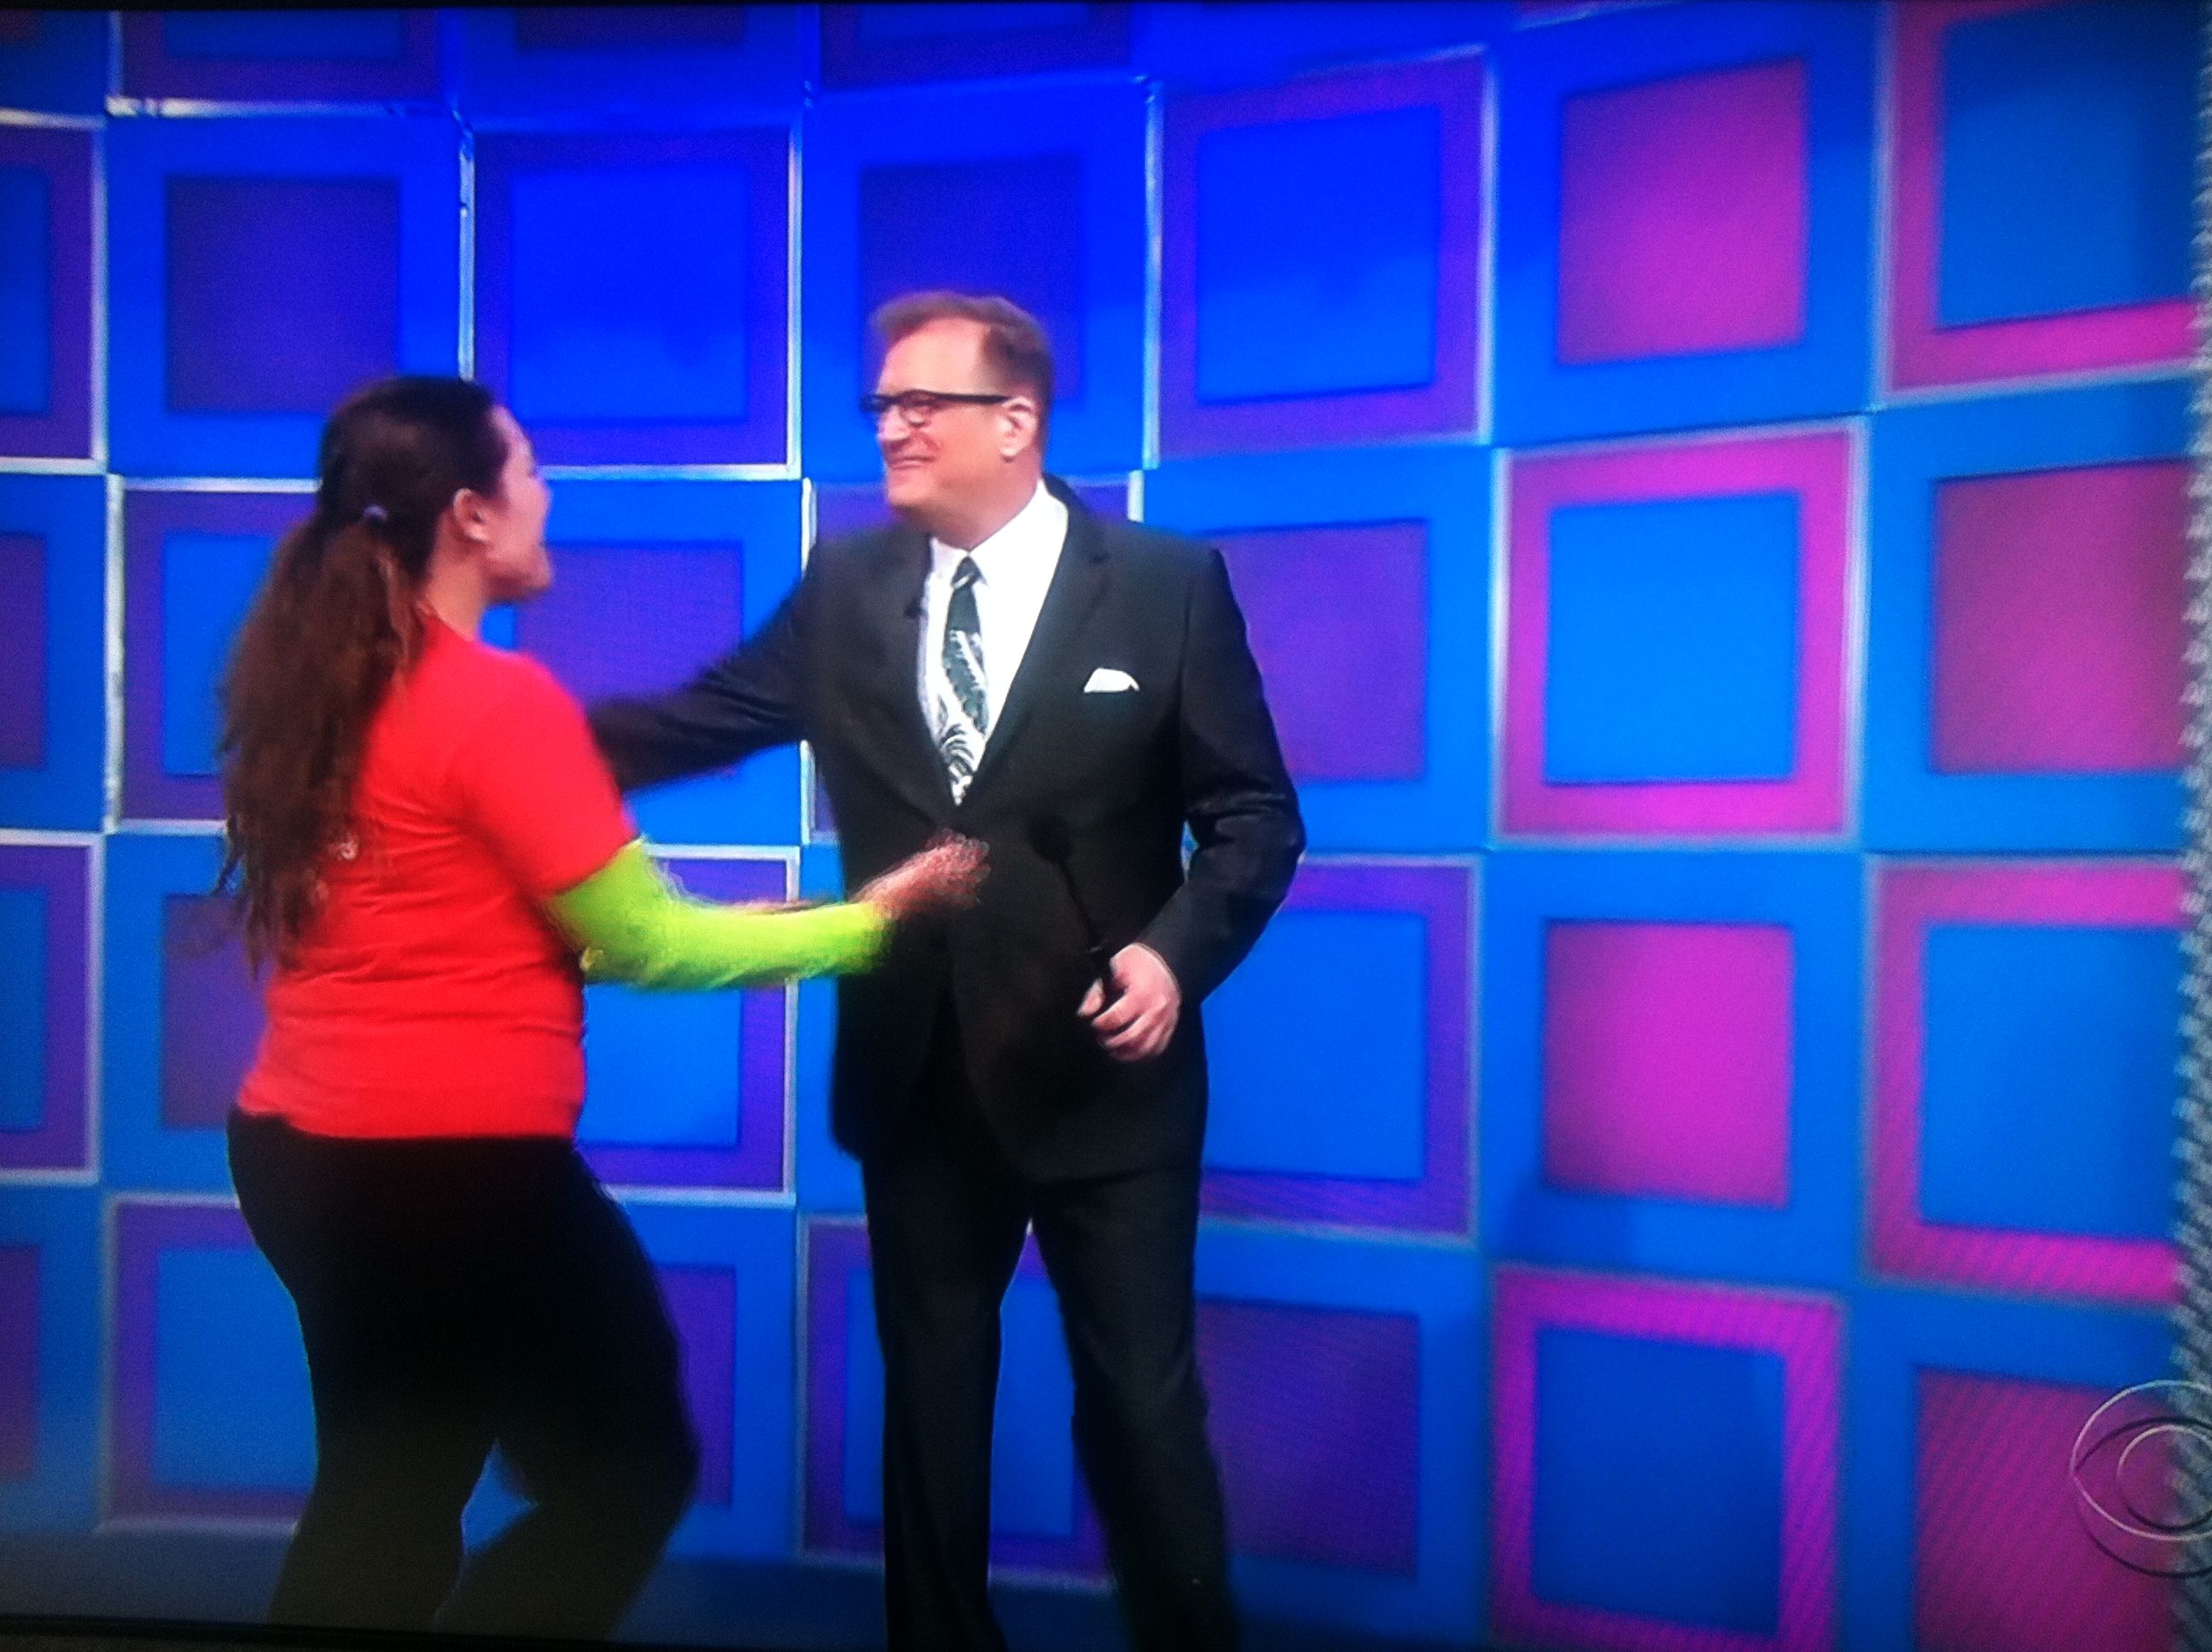 Aurora De Lucia going for a hug with Drew Carey on The Price is Right